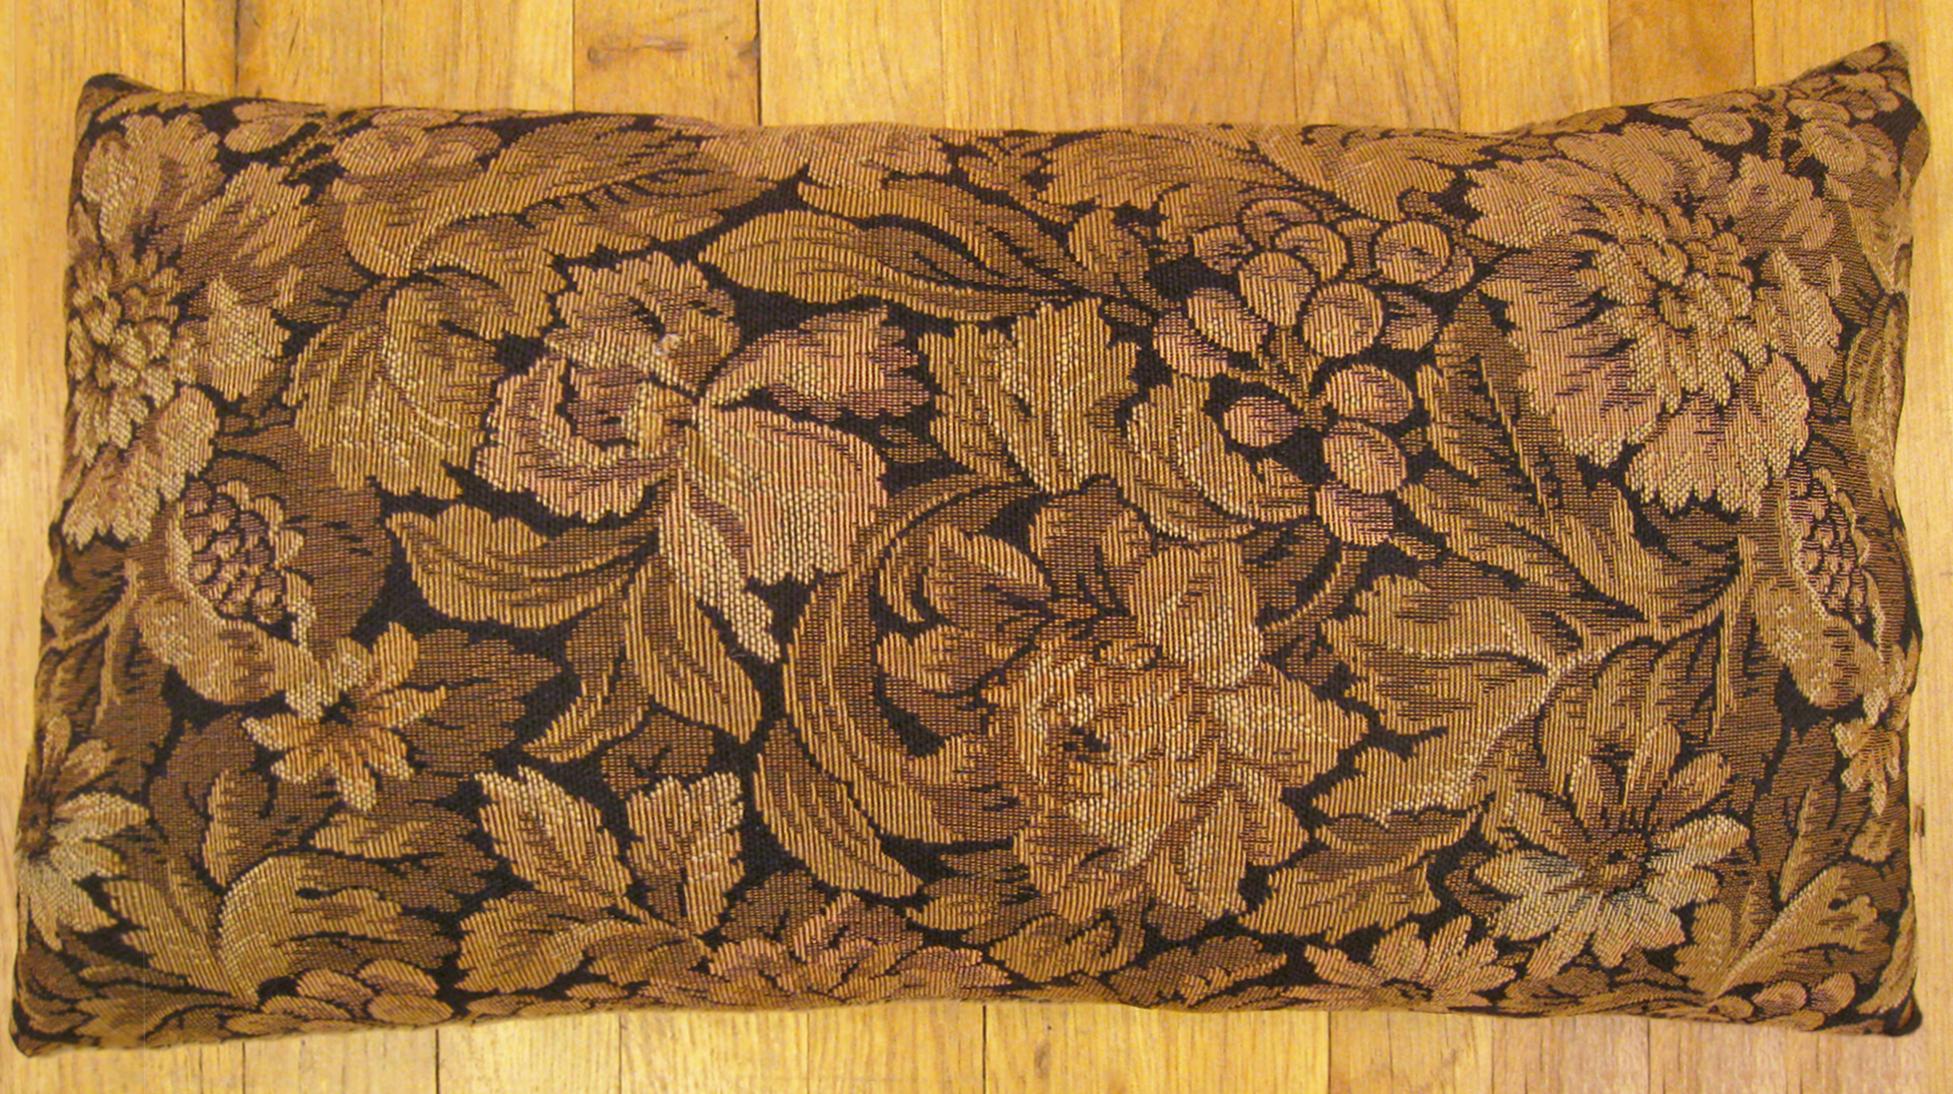 Antique French Tapestry Pillow; size 24” x 14” (2’ 0” x 1’ 2”). 

An antique decorative pillow with floral elments allover a brown central field, size 24” x 14” (2’ 0” x 1’ 2”). This lovely decorative pillow features an antique fabric on front which